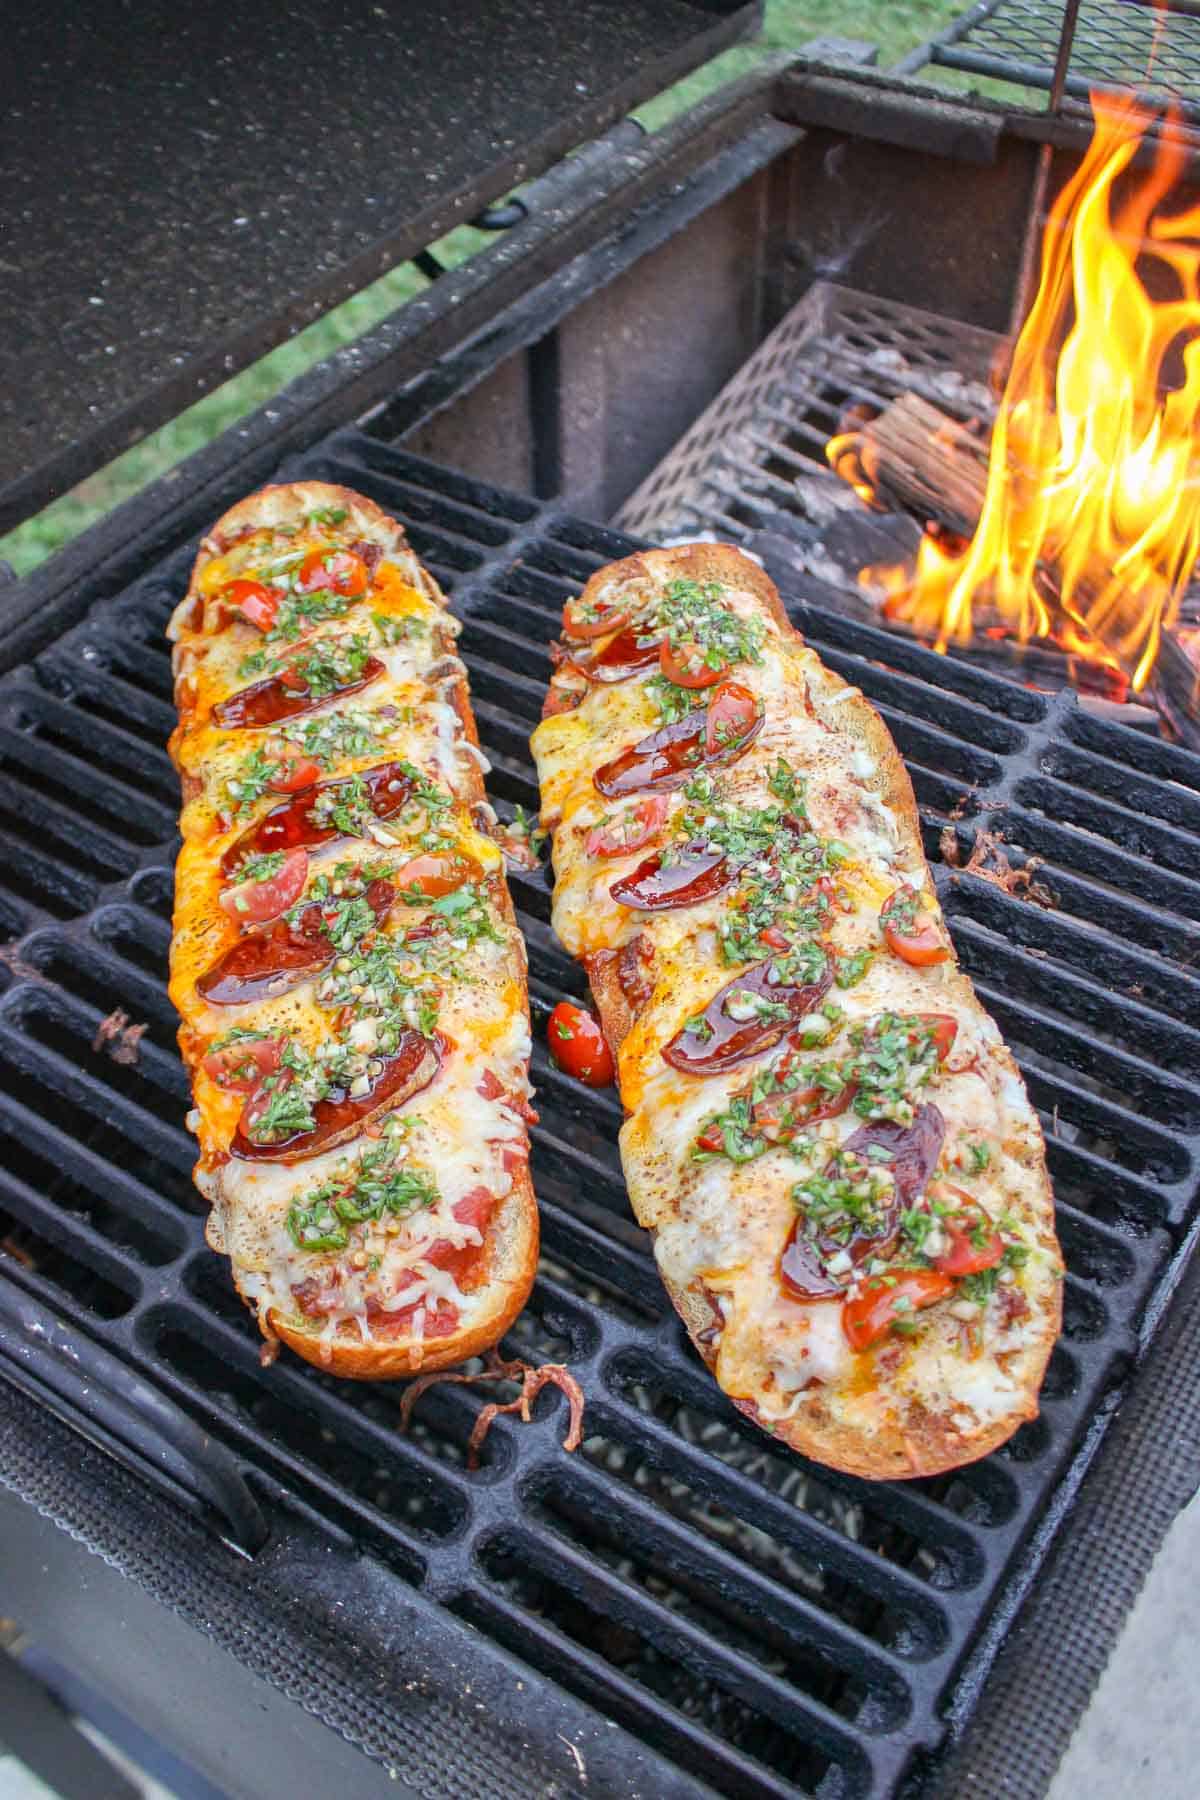 The two chorizo pizza breads next to each other on the grill.